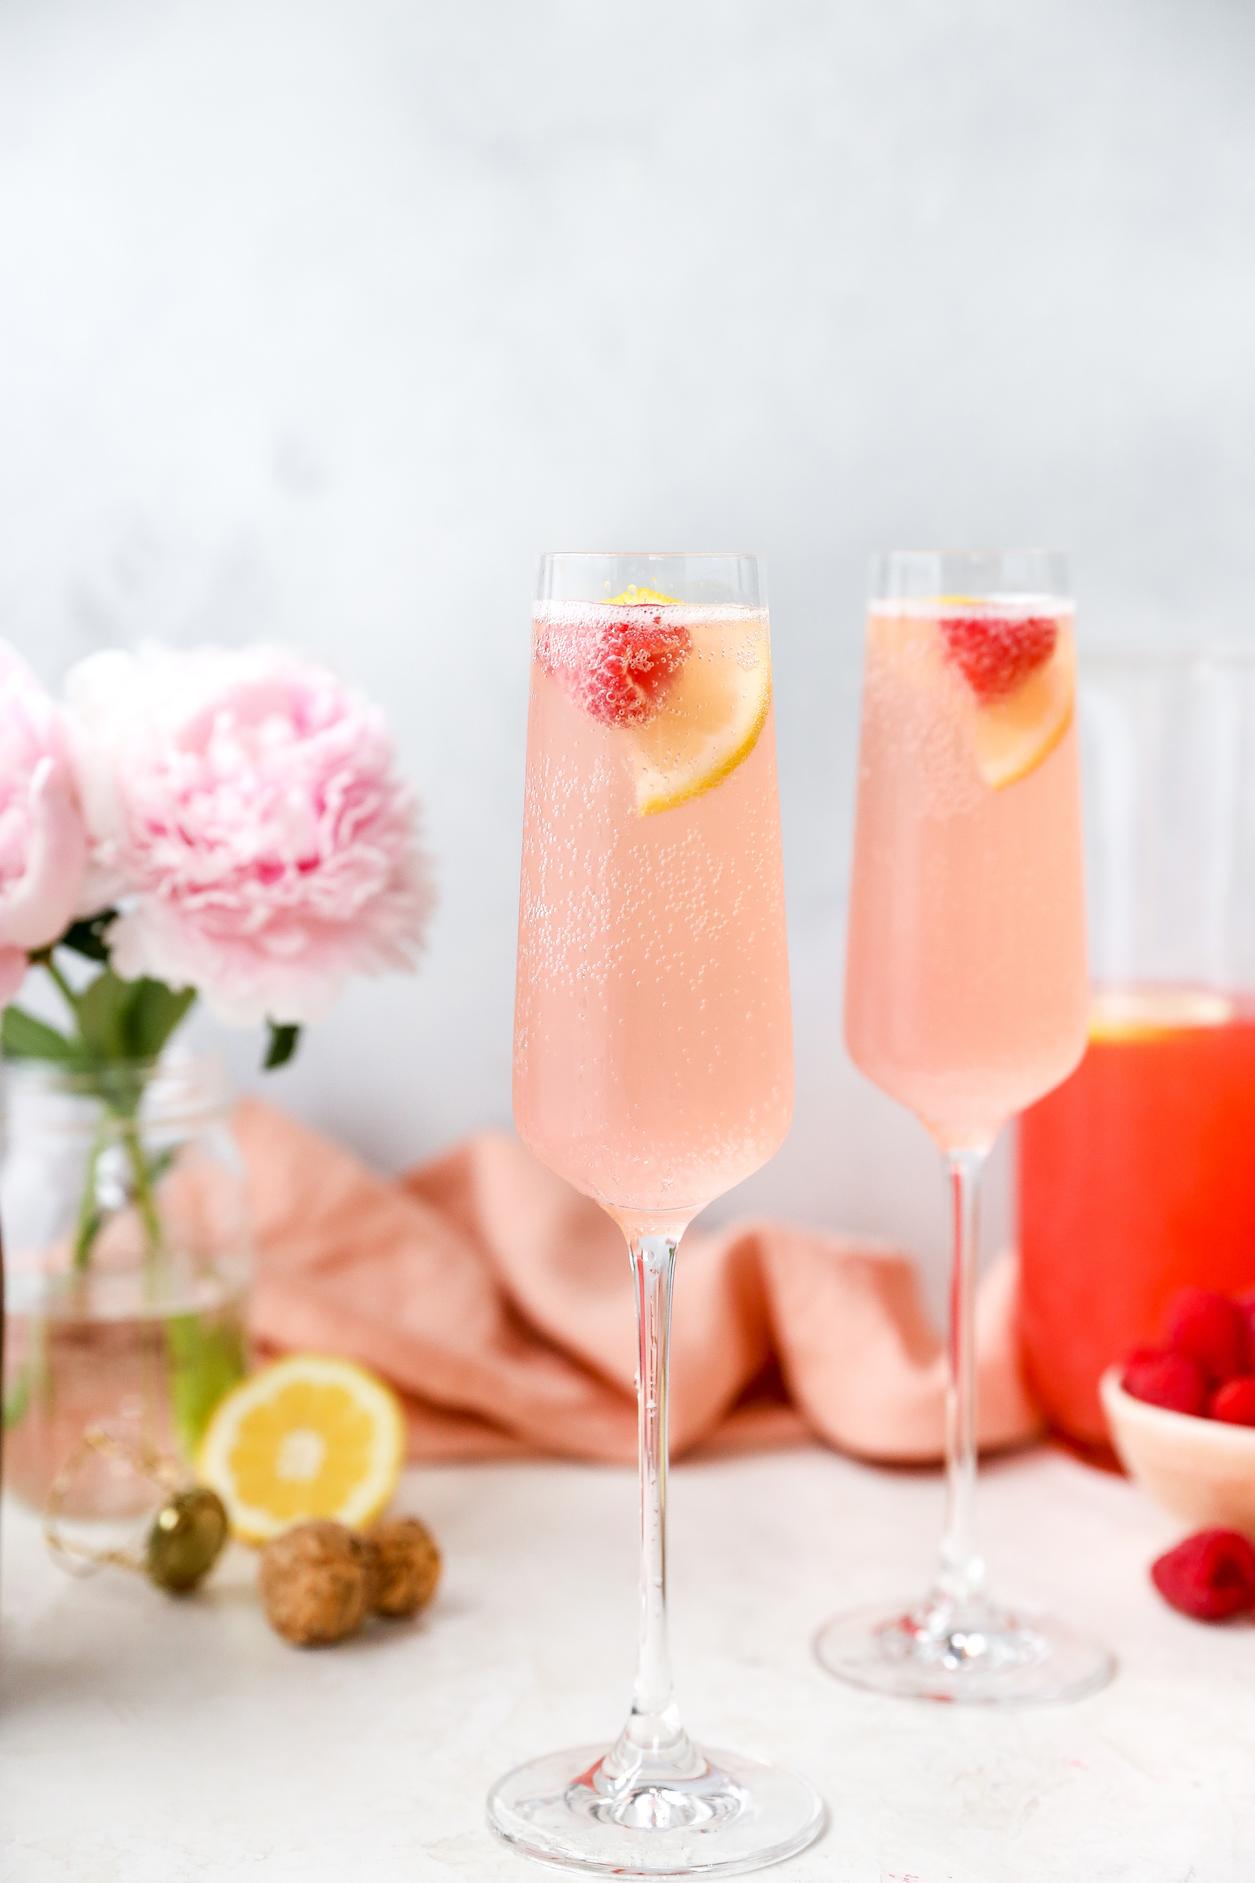  The perfect cocktail for a garden party or brunch.